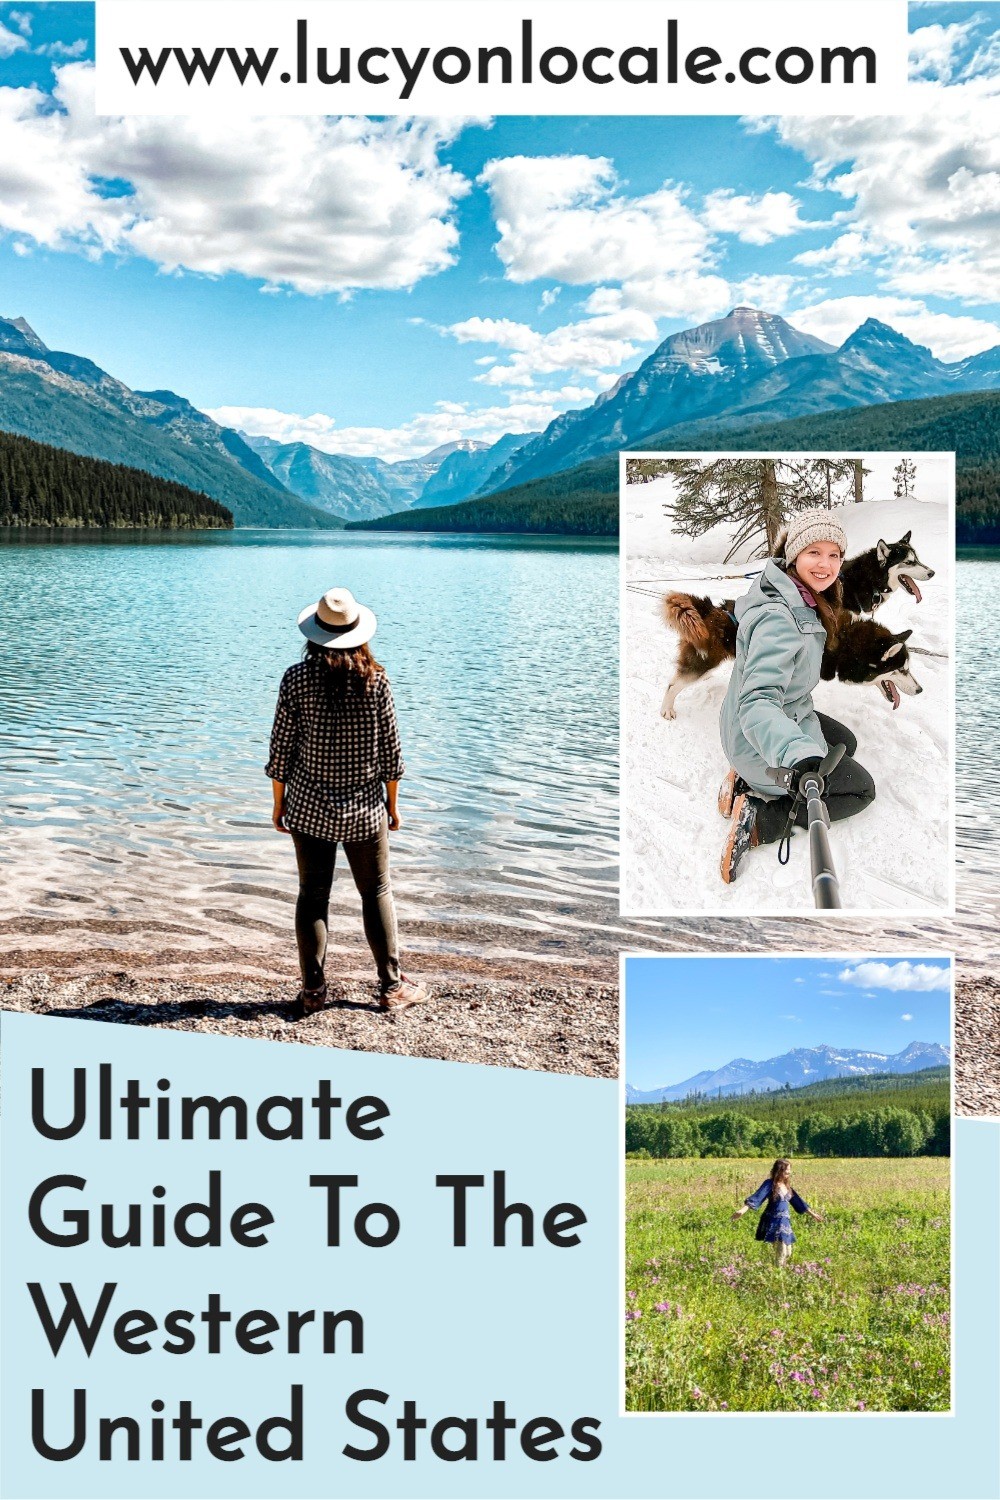 Your Ultimate Travel Guide to the Western United States